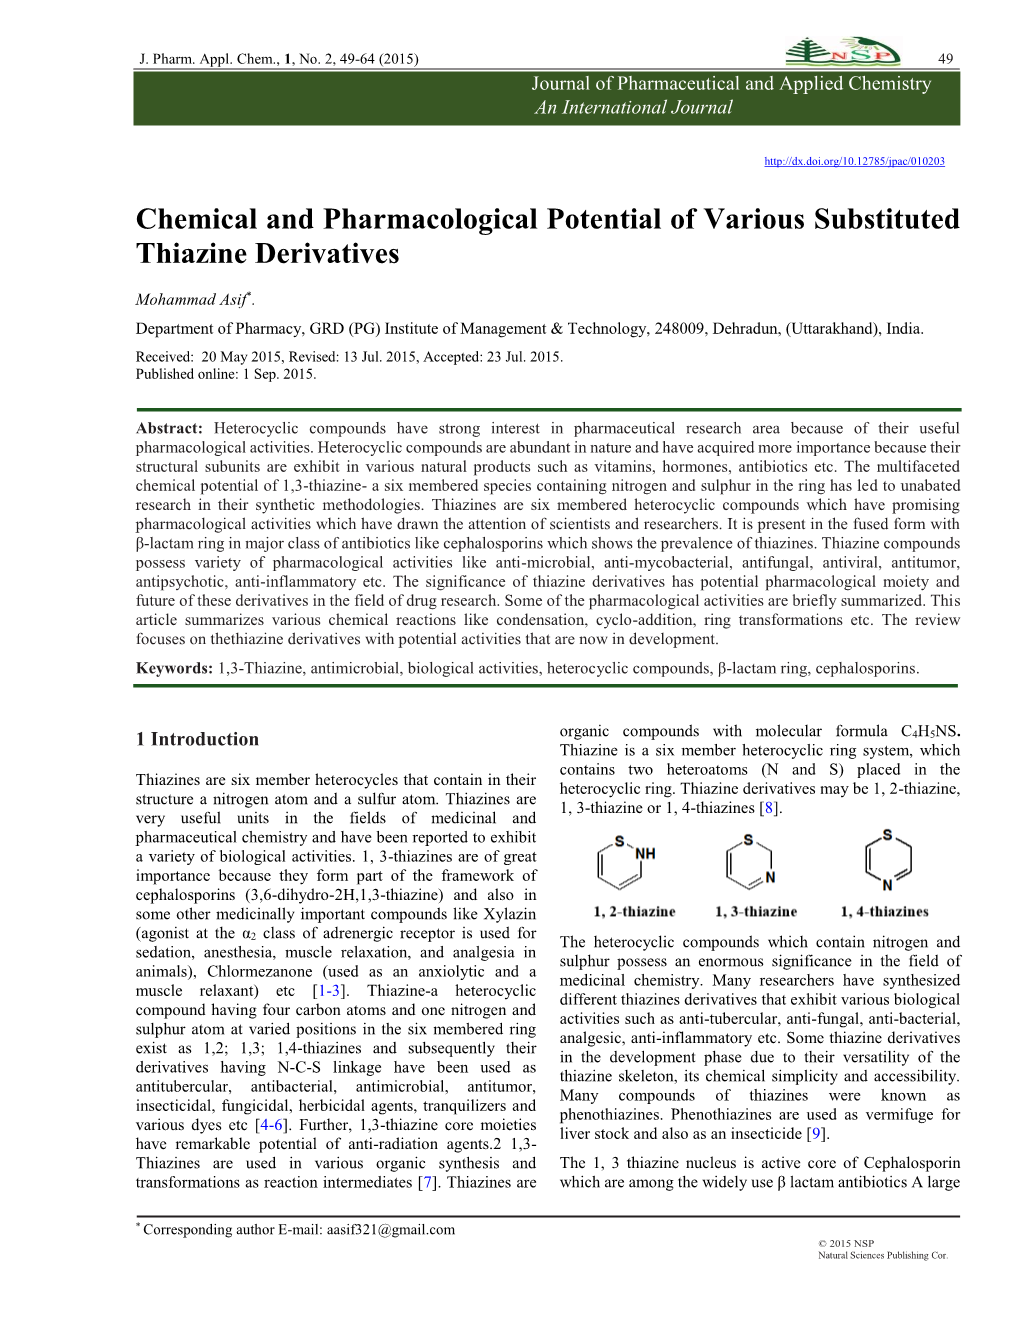 Chemical and Pharmacological Potential of Various Substituted Thiazine Derivatives